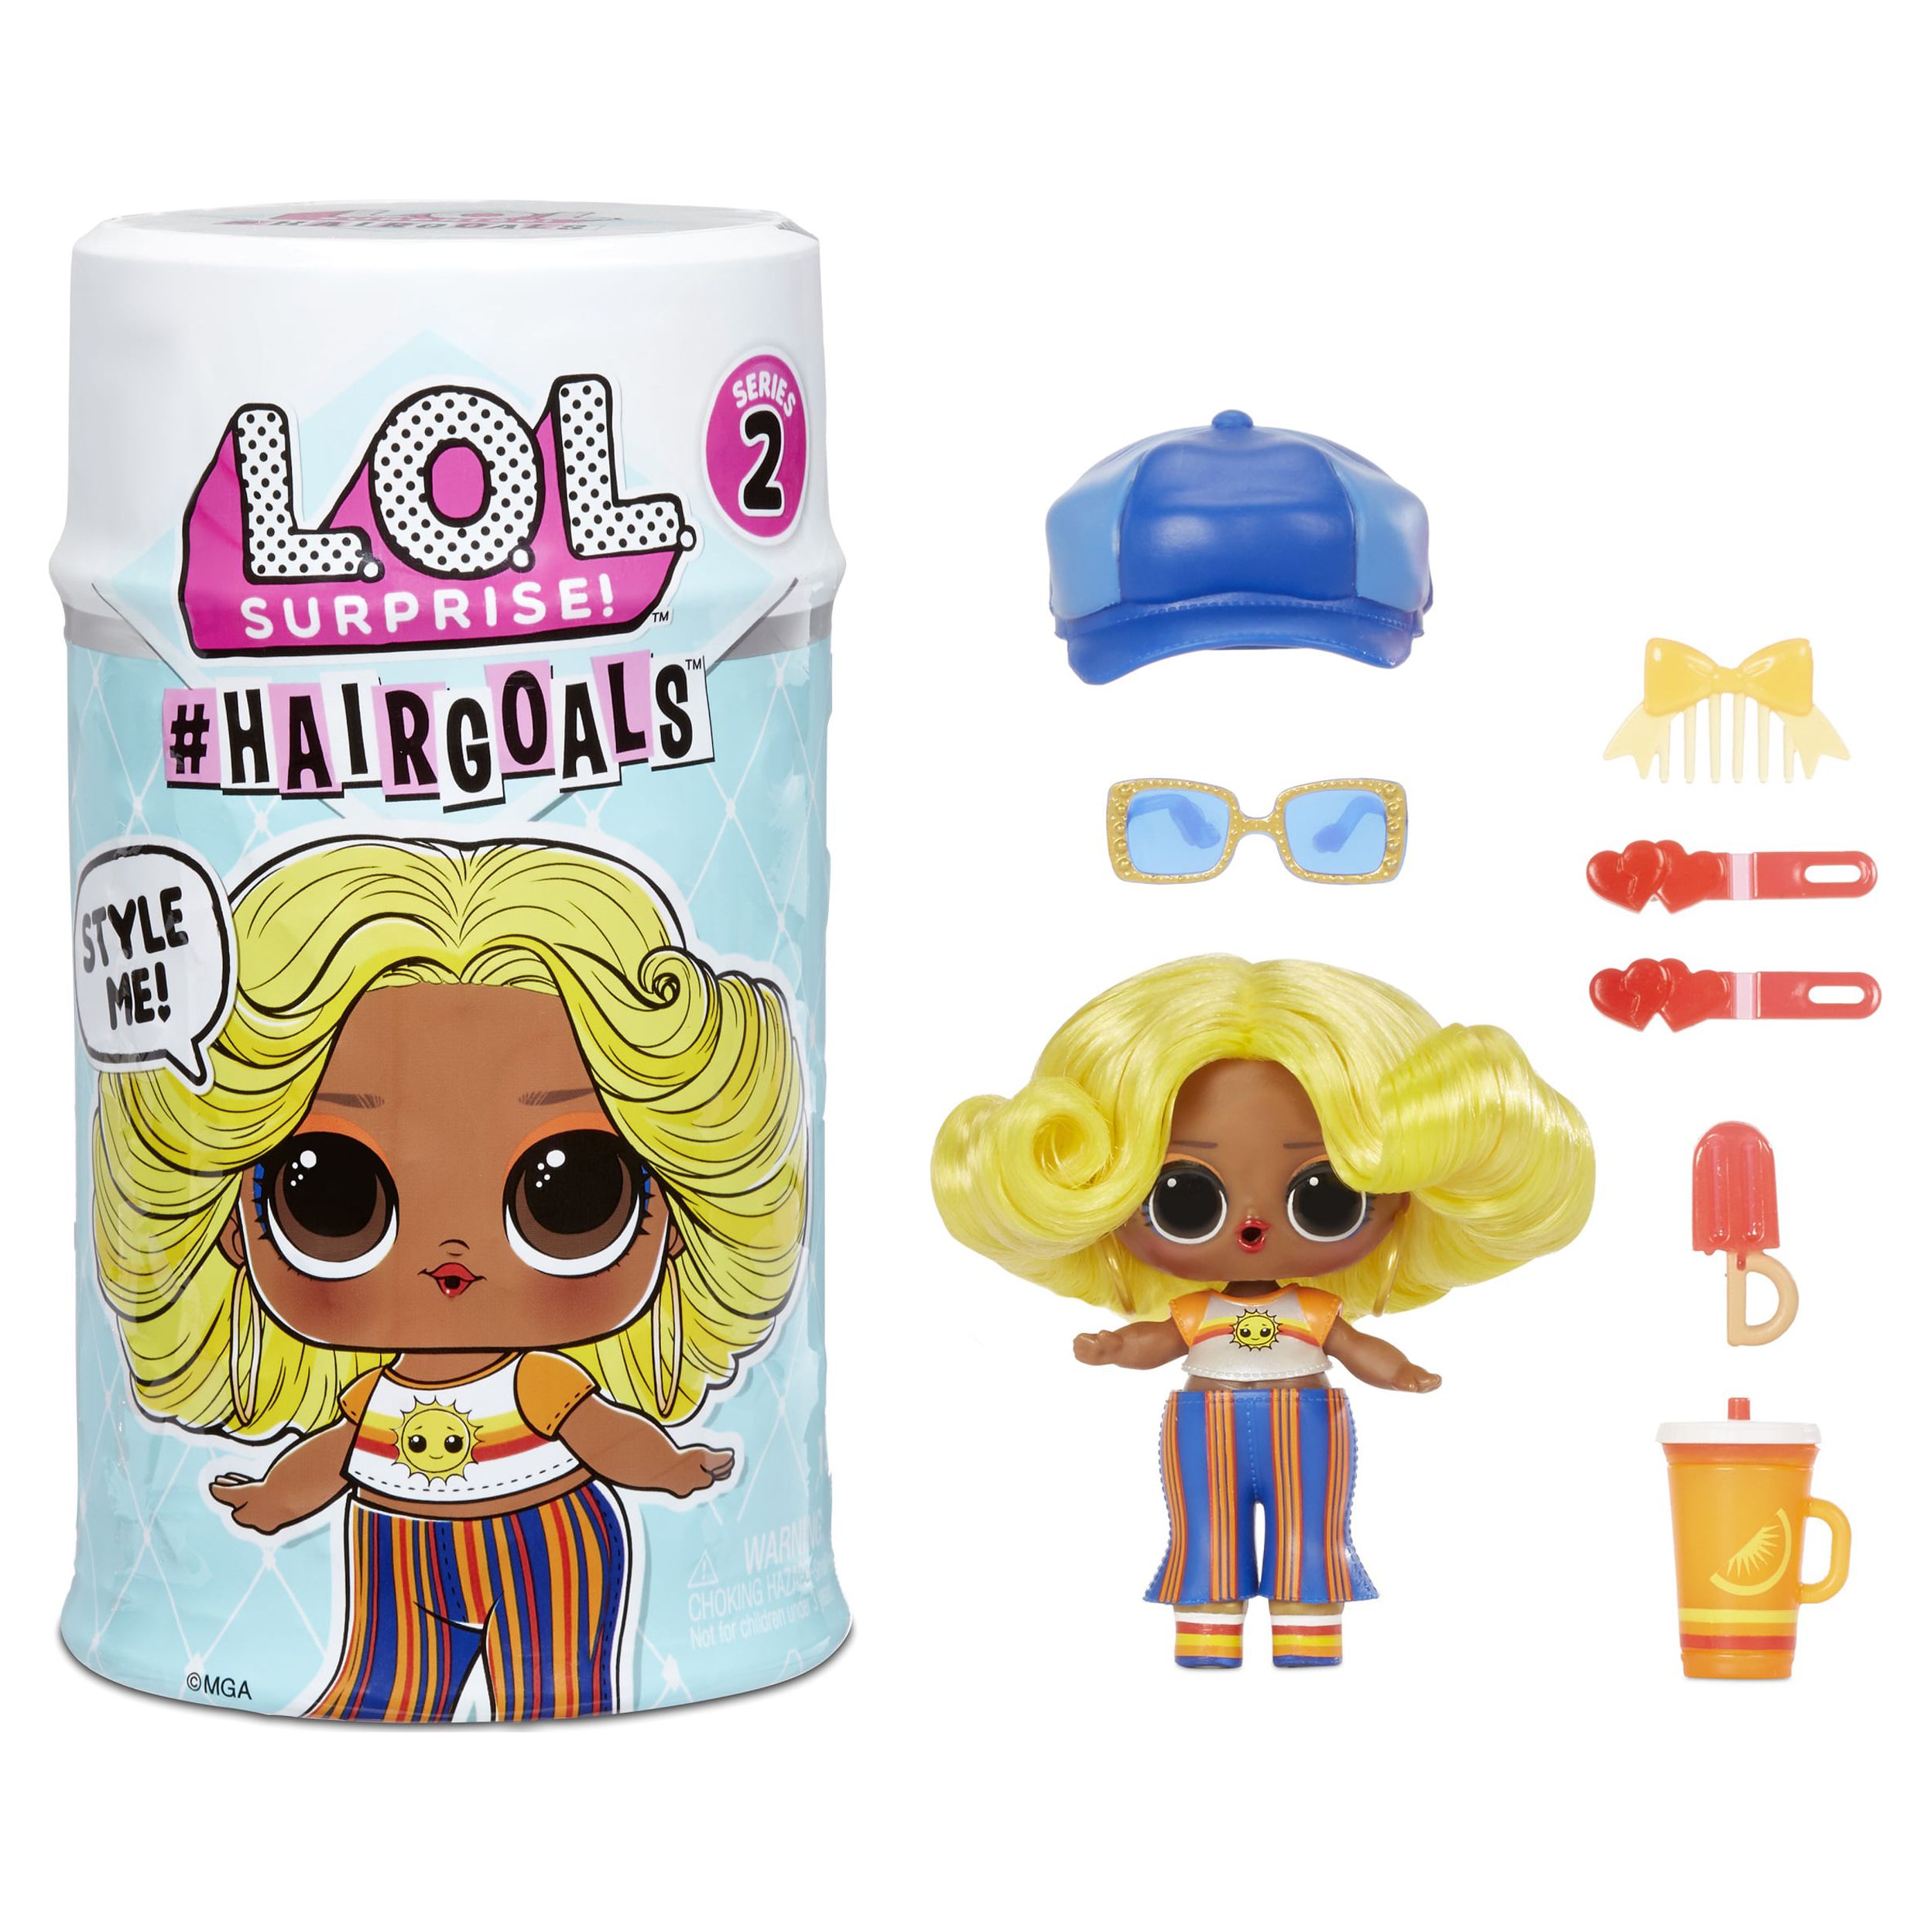 LOL Surprise Hairgoals Series 2 Doll With Real Hair and 15 Surprises, Accessories, Great Gift for Kids Ages 4 5 6+ - image 3 of 8